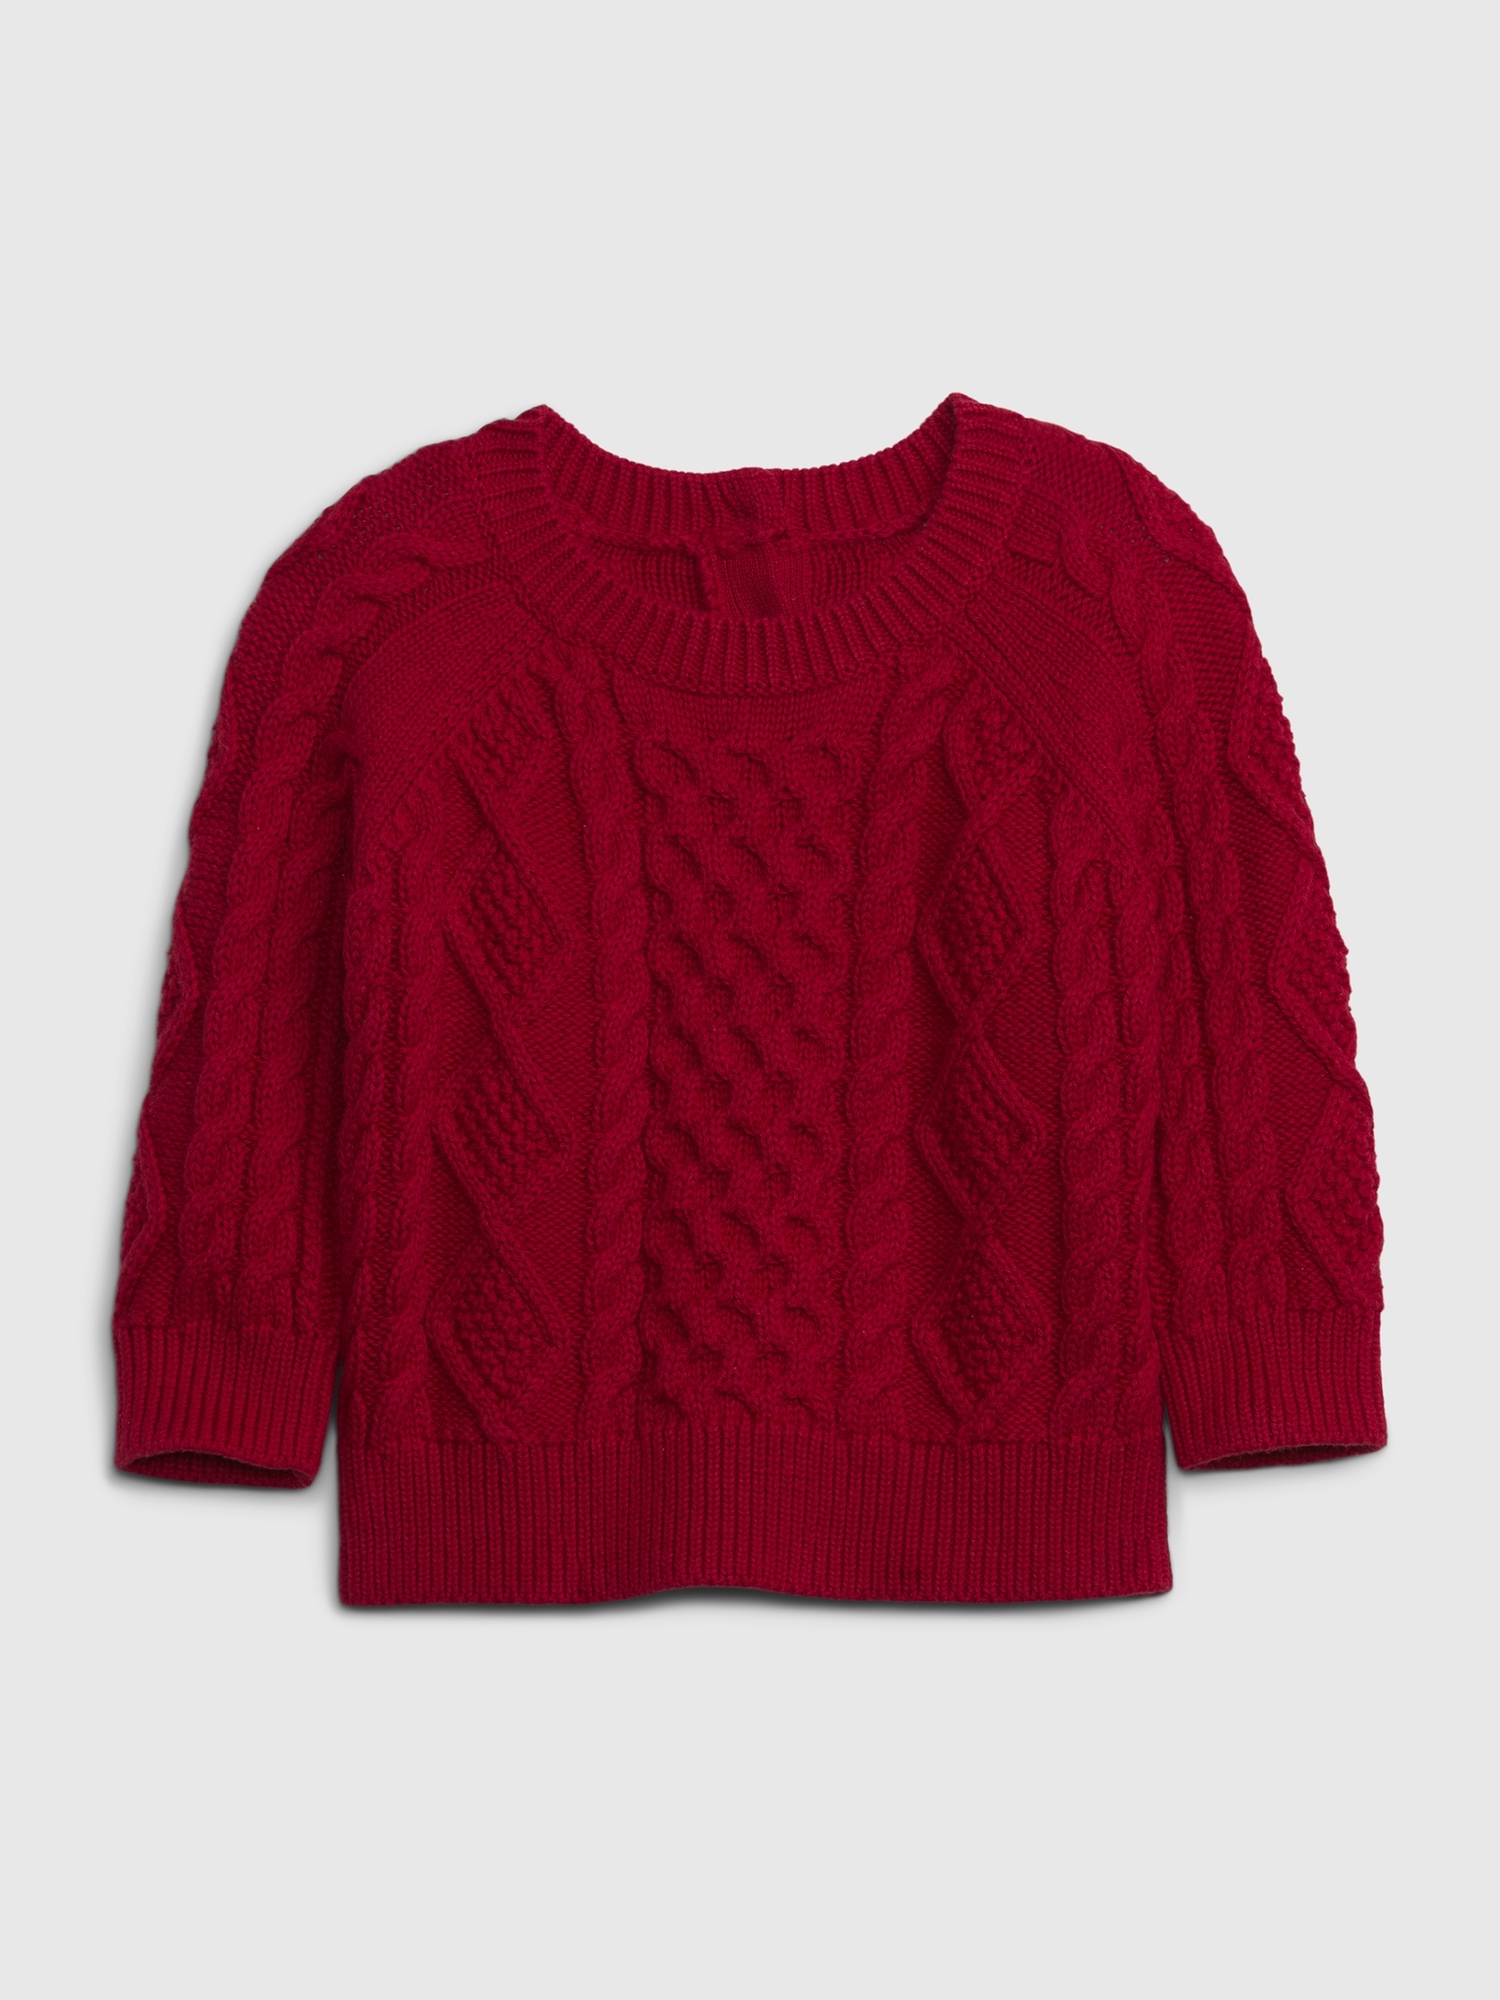 Baby Cable-Knit Sweater | Gap